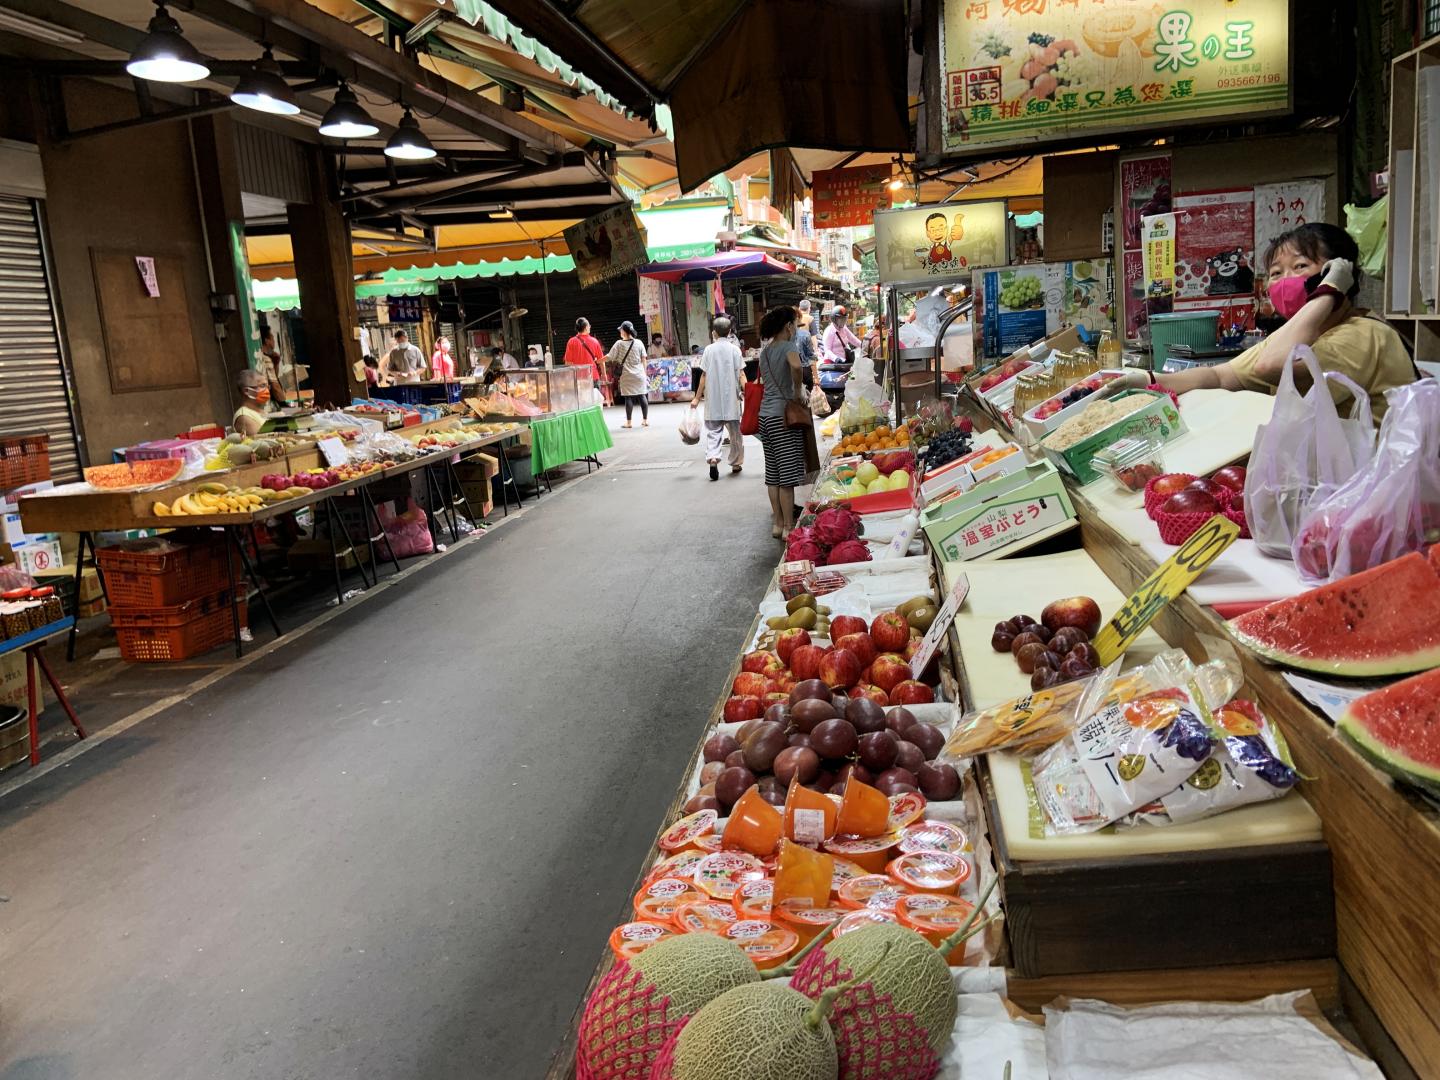 Wet markets' are not as bad for health and biodiversity as we think